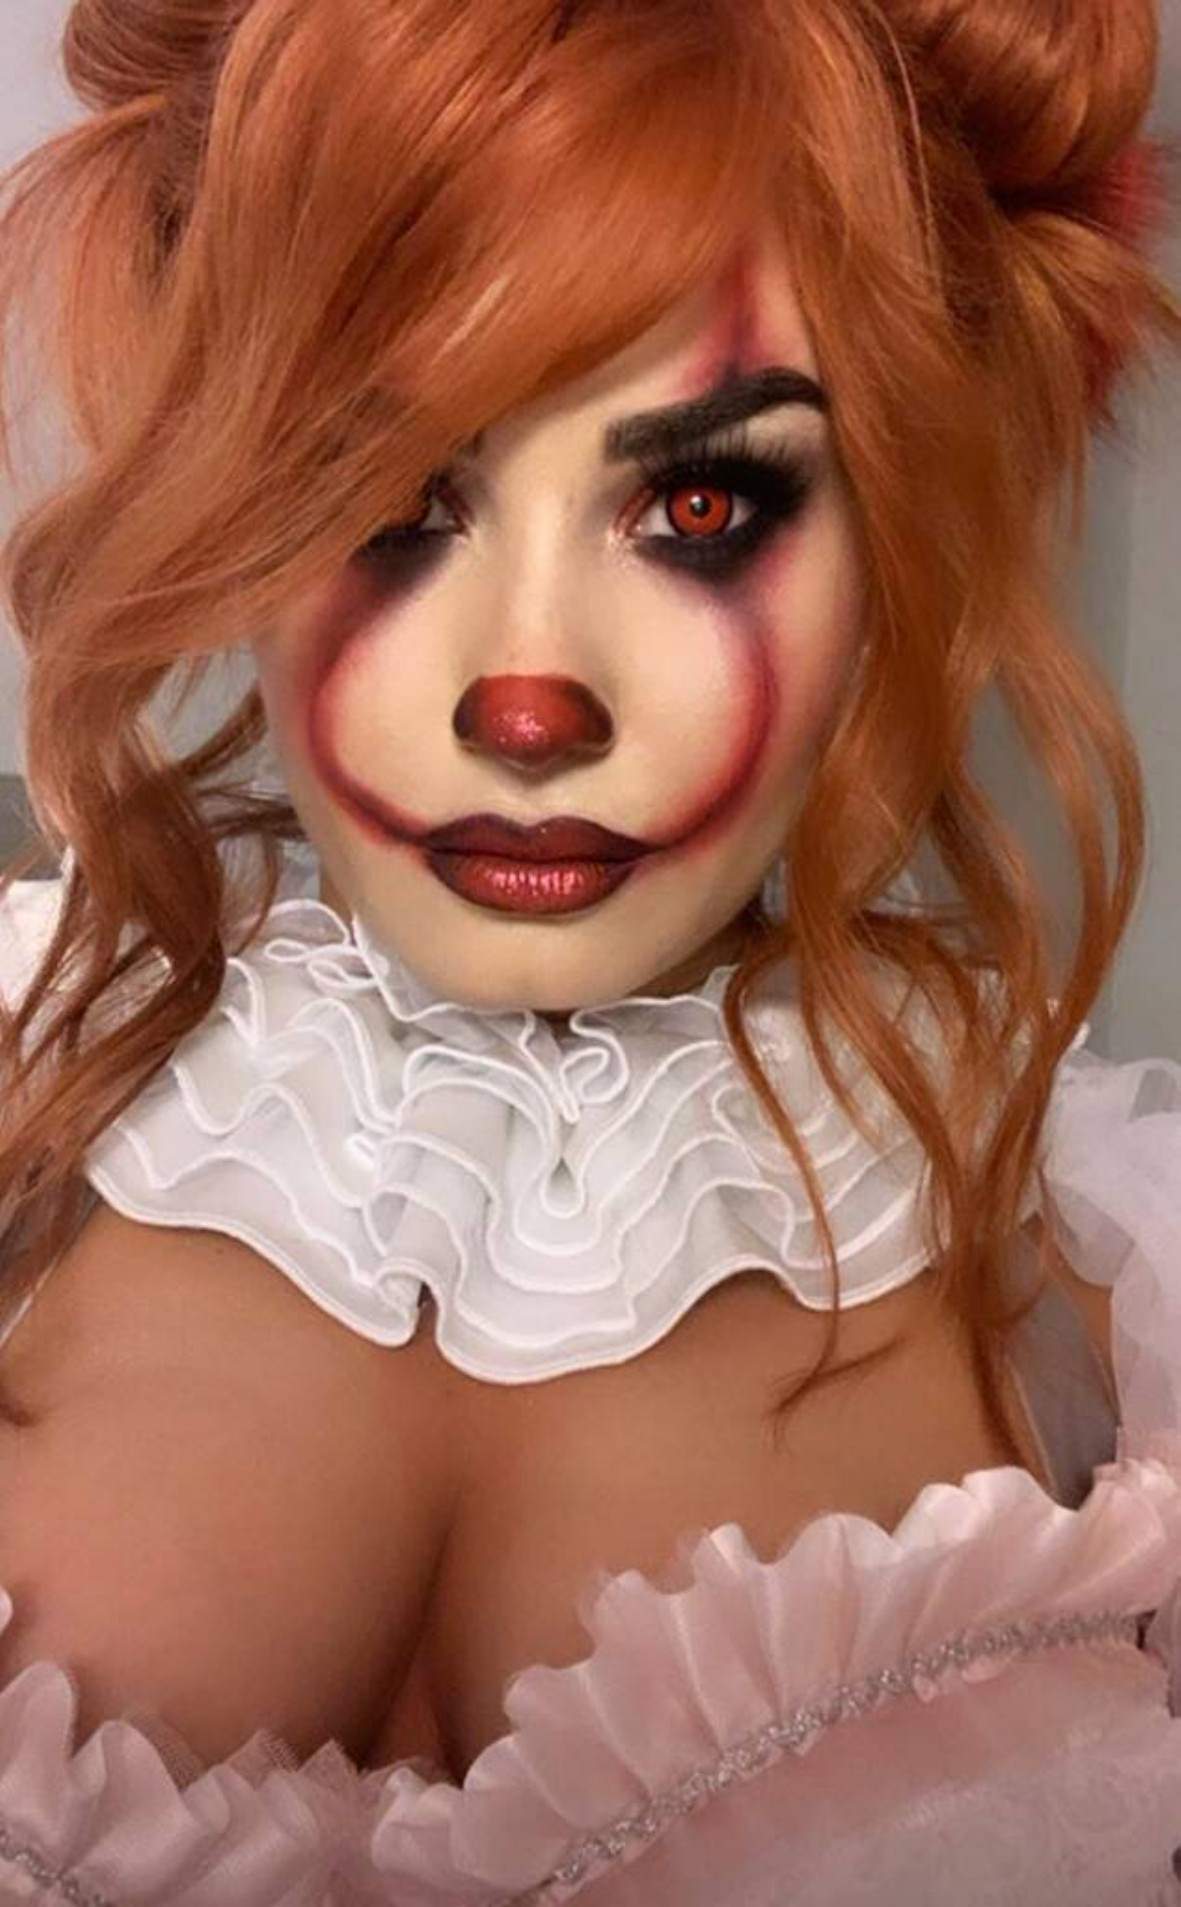  Pennywise by Demi Lovato